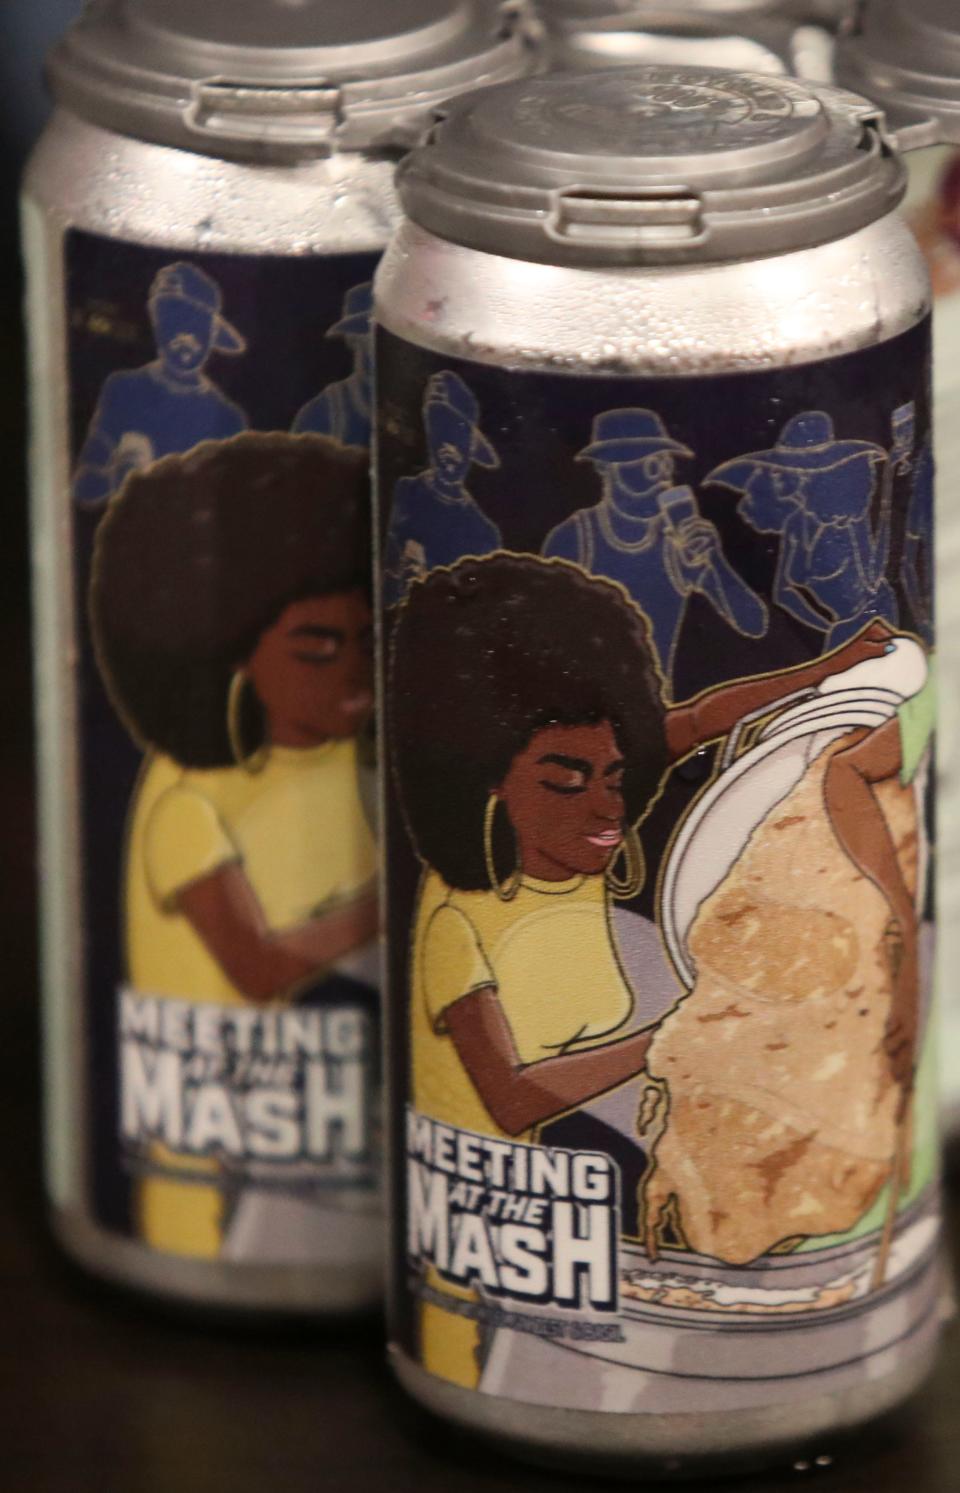 Cans of Meeting at the Mash, a collaboration between the Melanated Mash Makers and Attic Brewing.